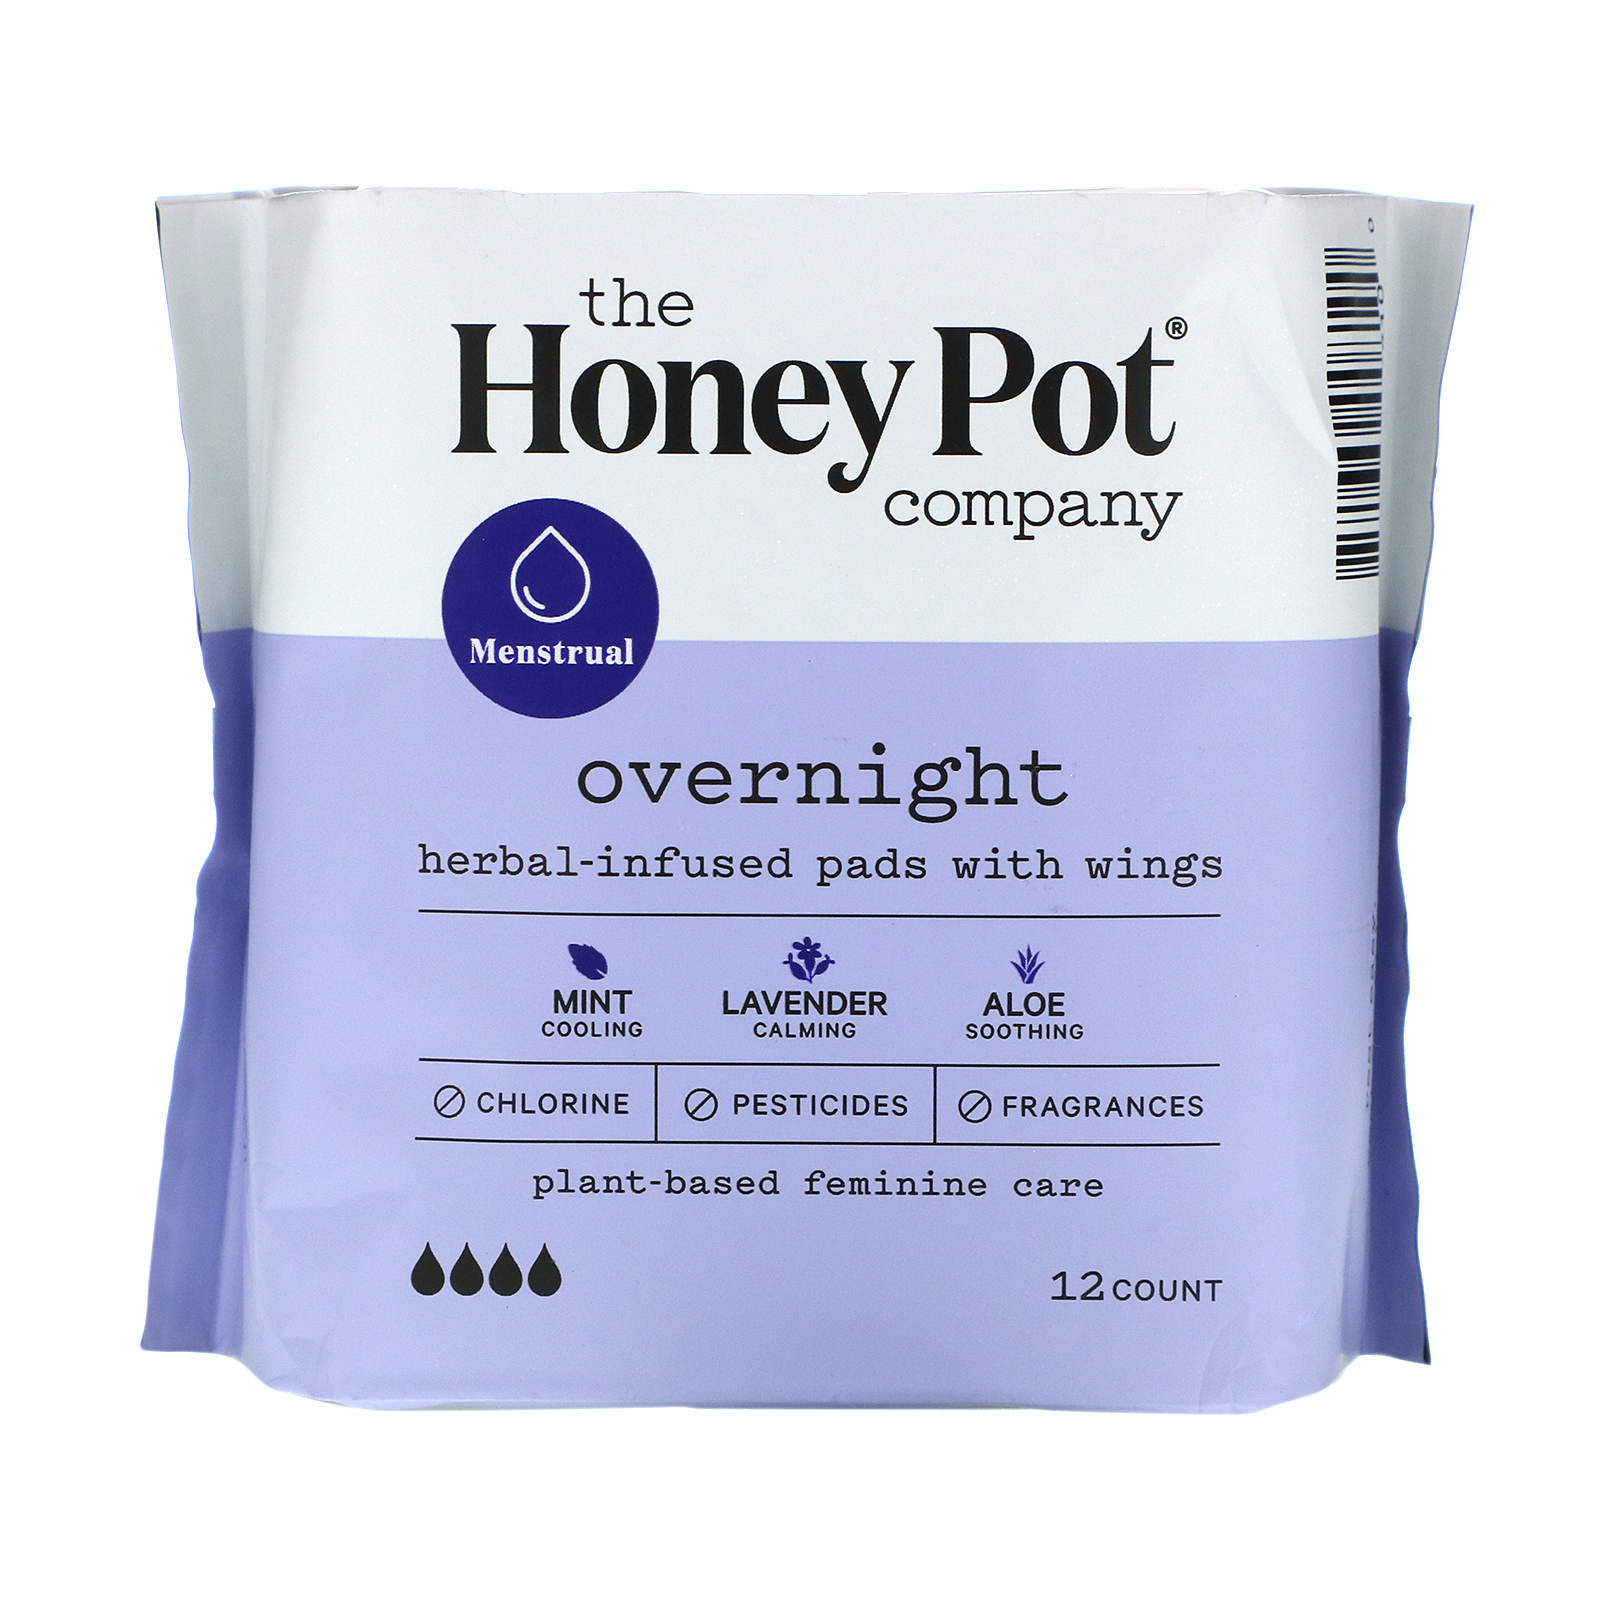 The Honey Pot Company, HerbalInfused Pads with Wings, Overnight, 12